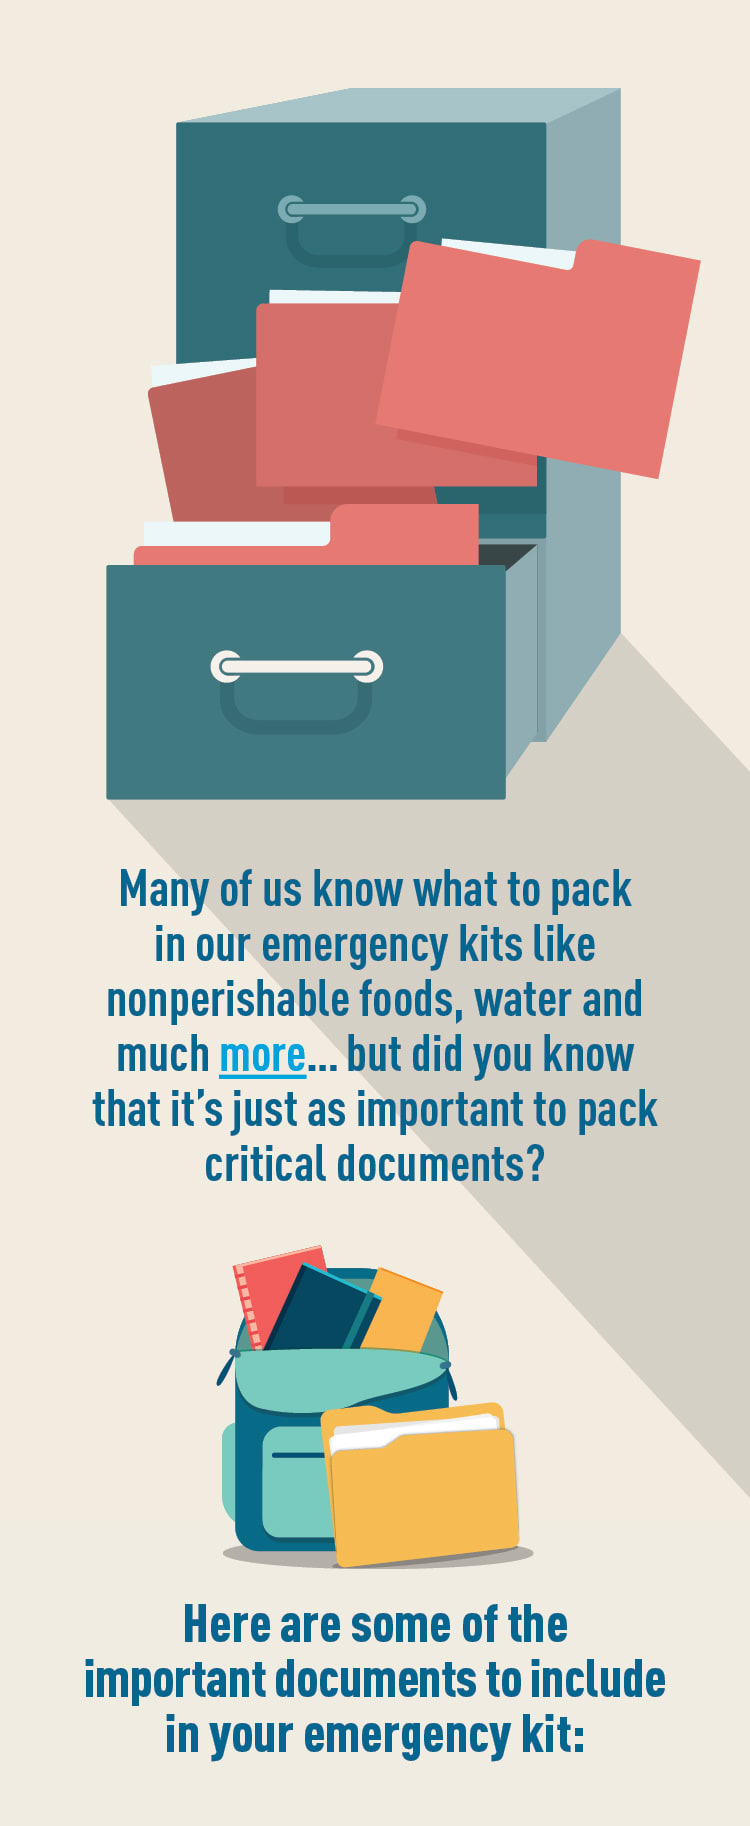 Graphic of a file cabinet. Text: Many of us know what to pack in our emergency kits like nonperishable foods, water and much more... but did you know that it's just as important to pack critical documents?